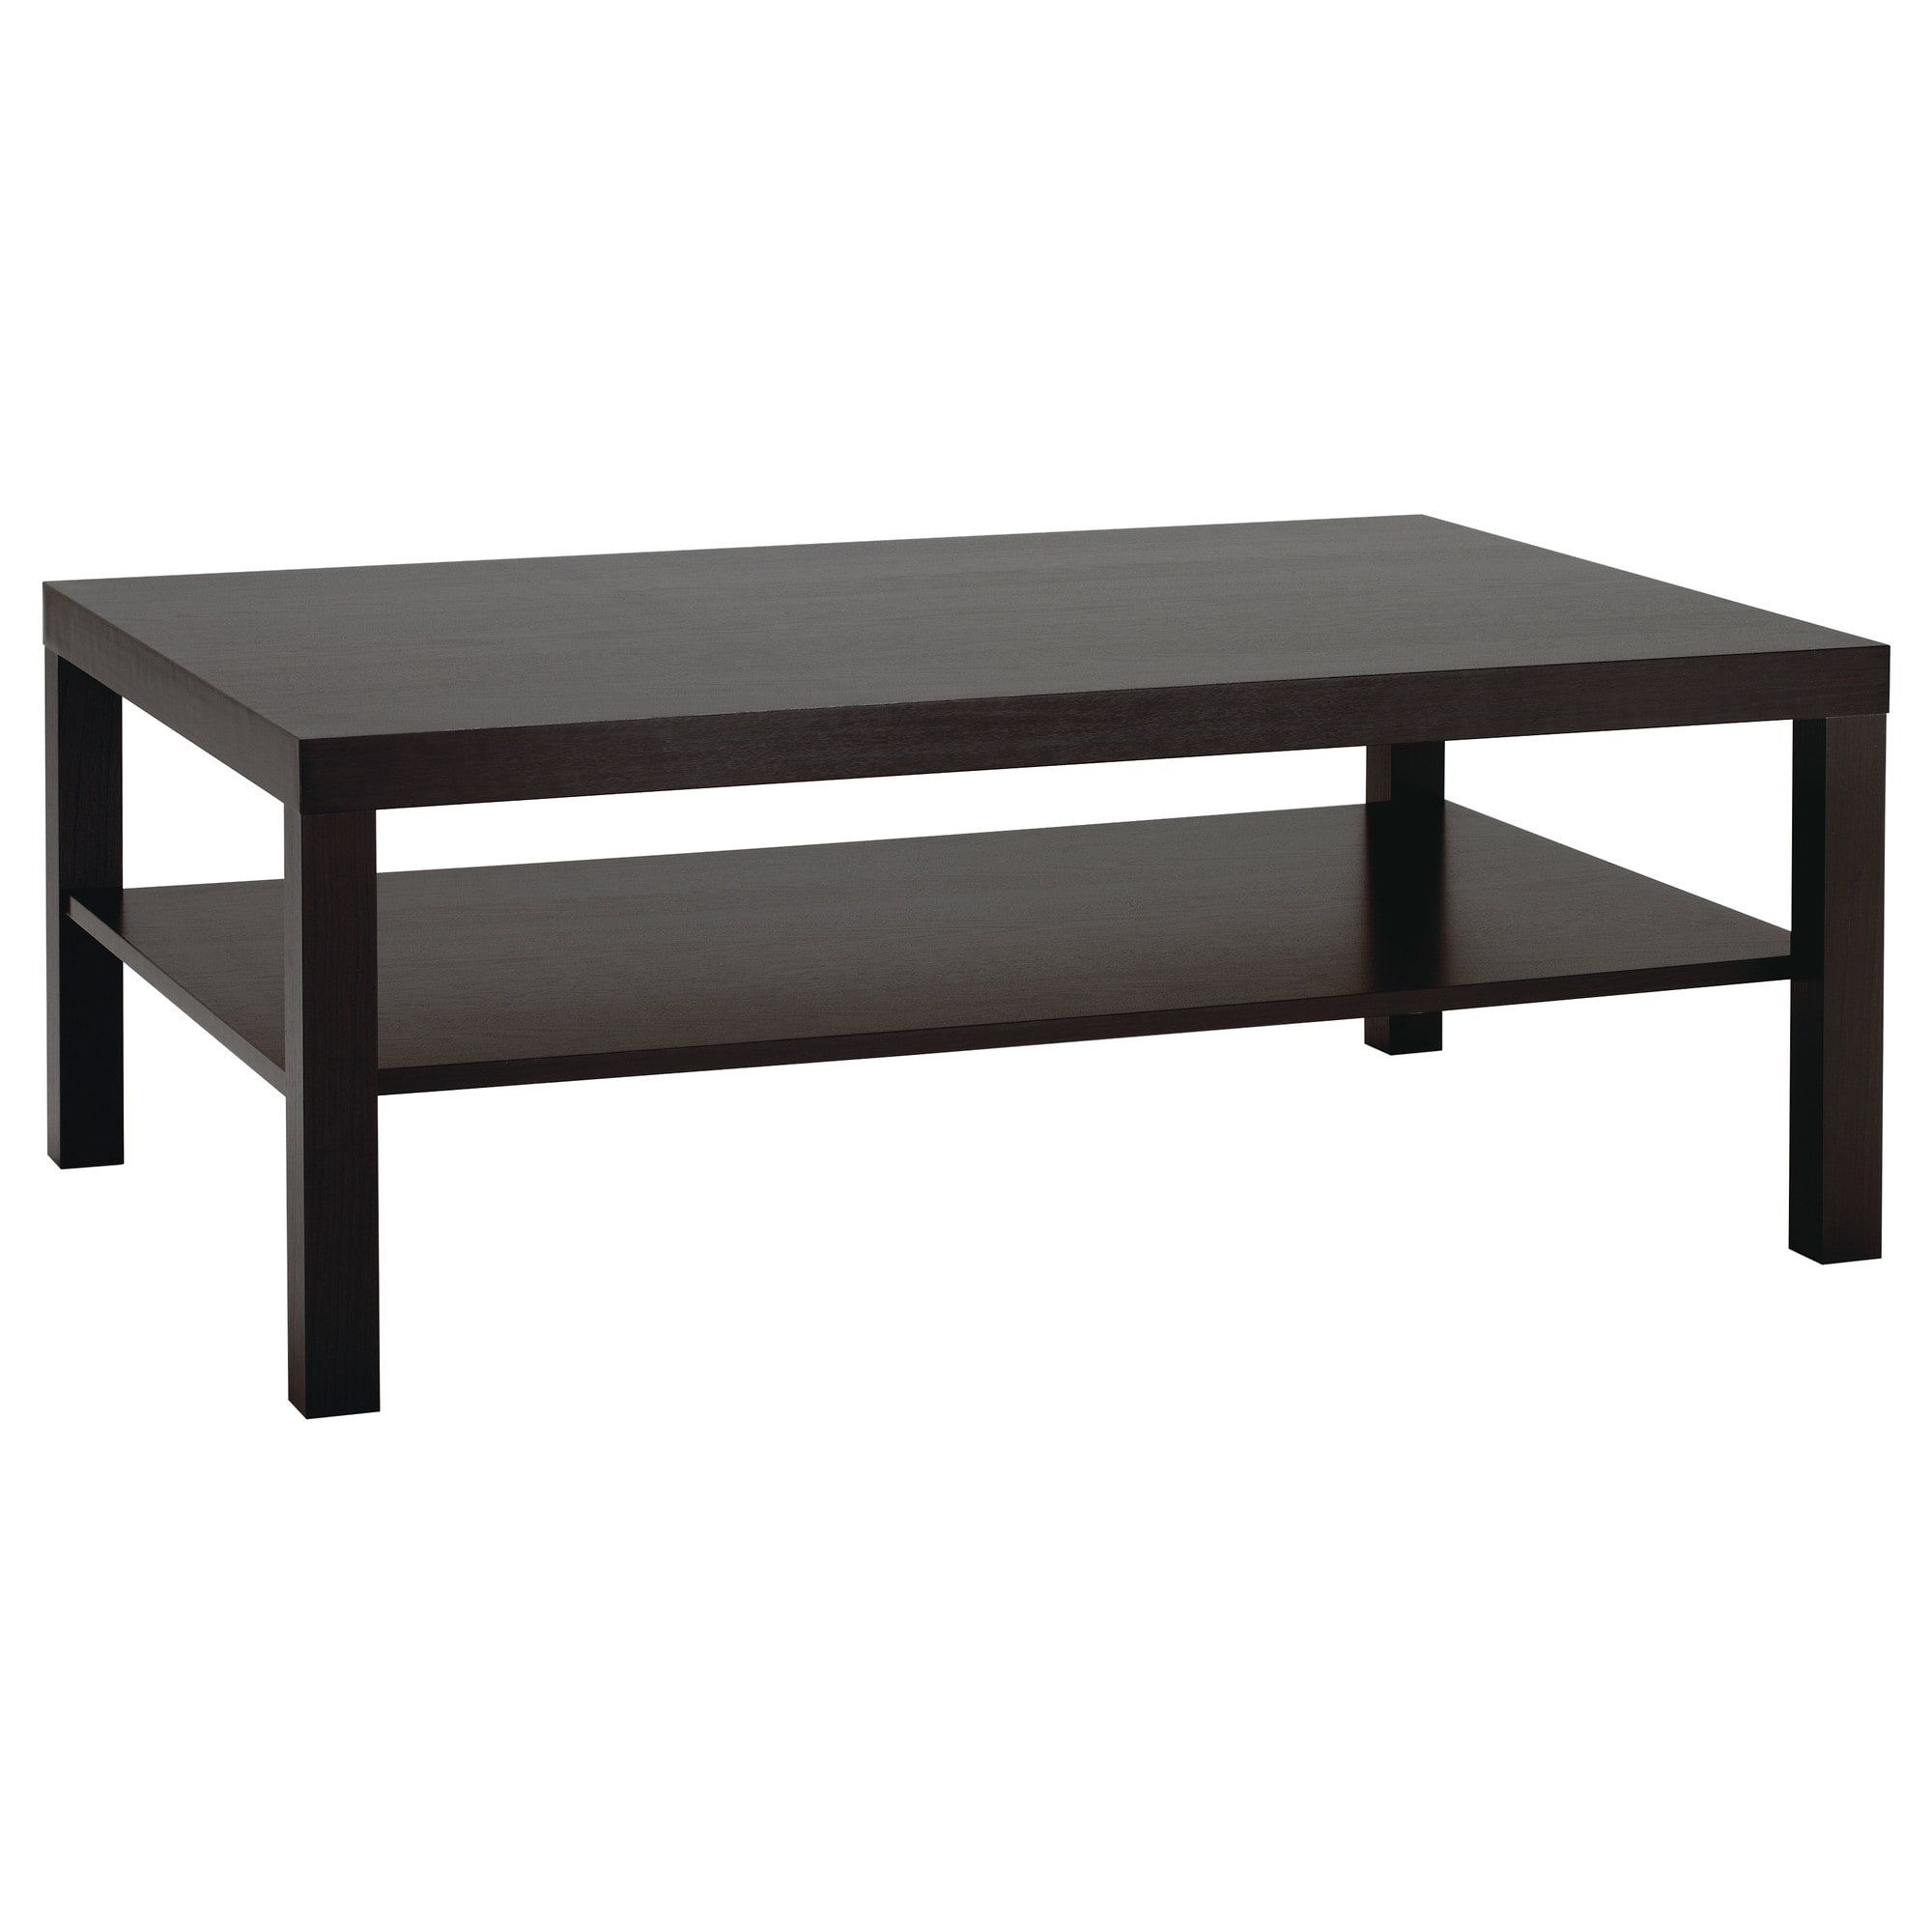 Lack Coffee Table – Black Brown – Ikea In Well Known Kai Small Coffee Tables (View 15 of 20)